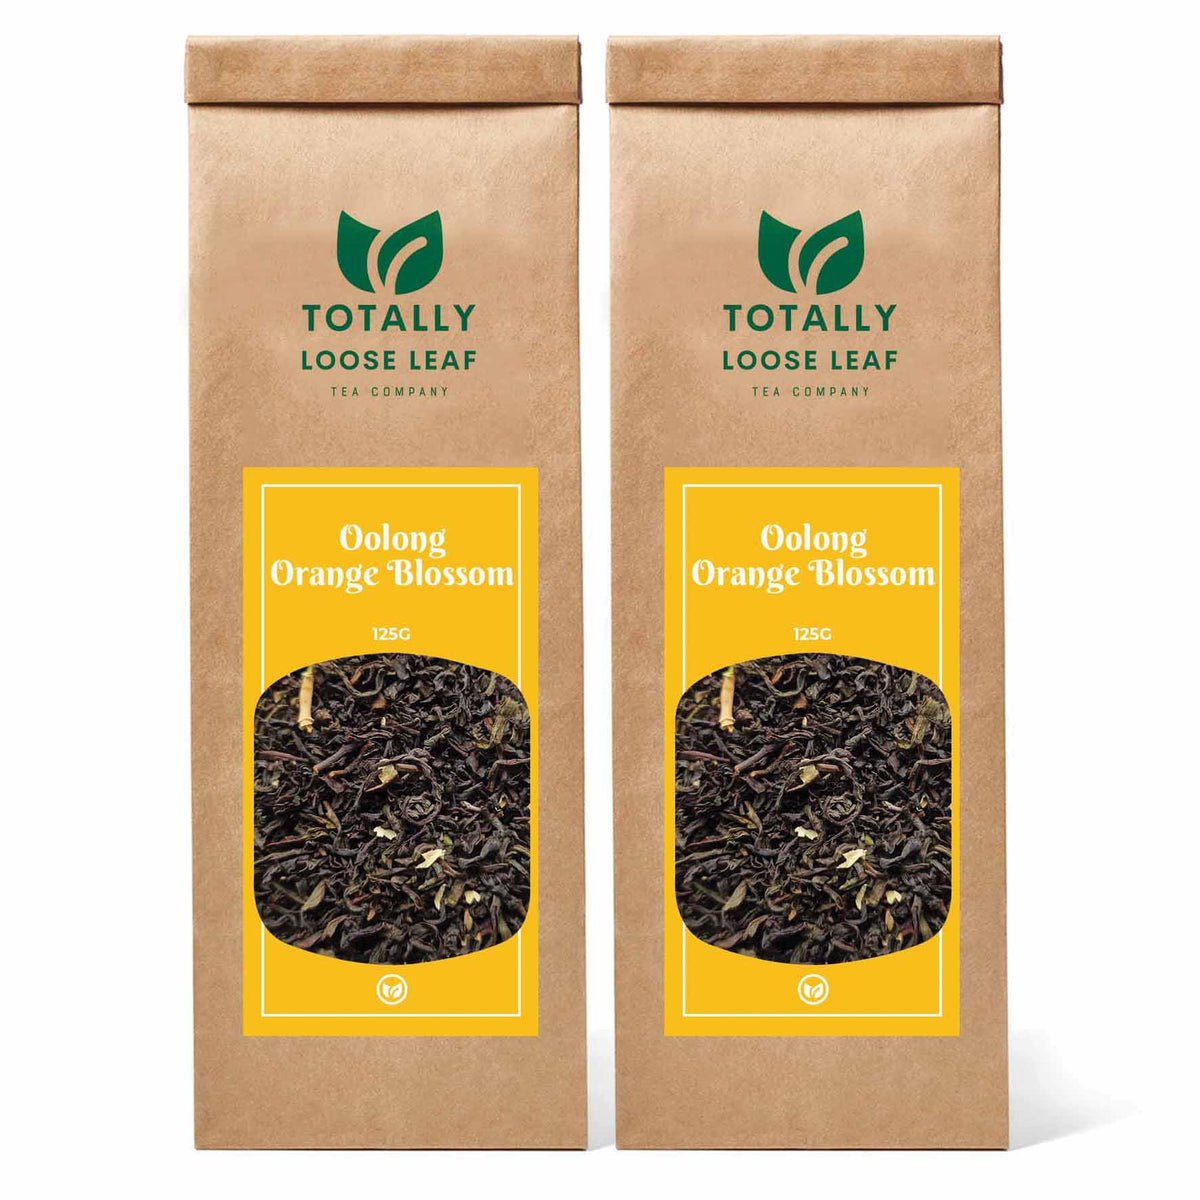 Oolong Orange Blossom Loose Leaf Tea - two pouches